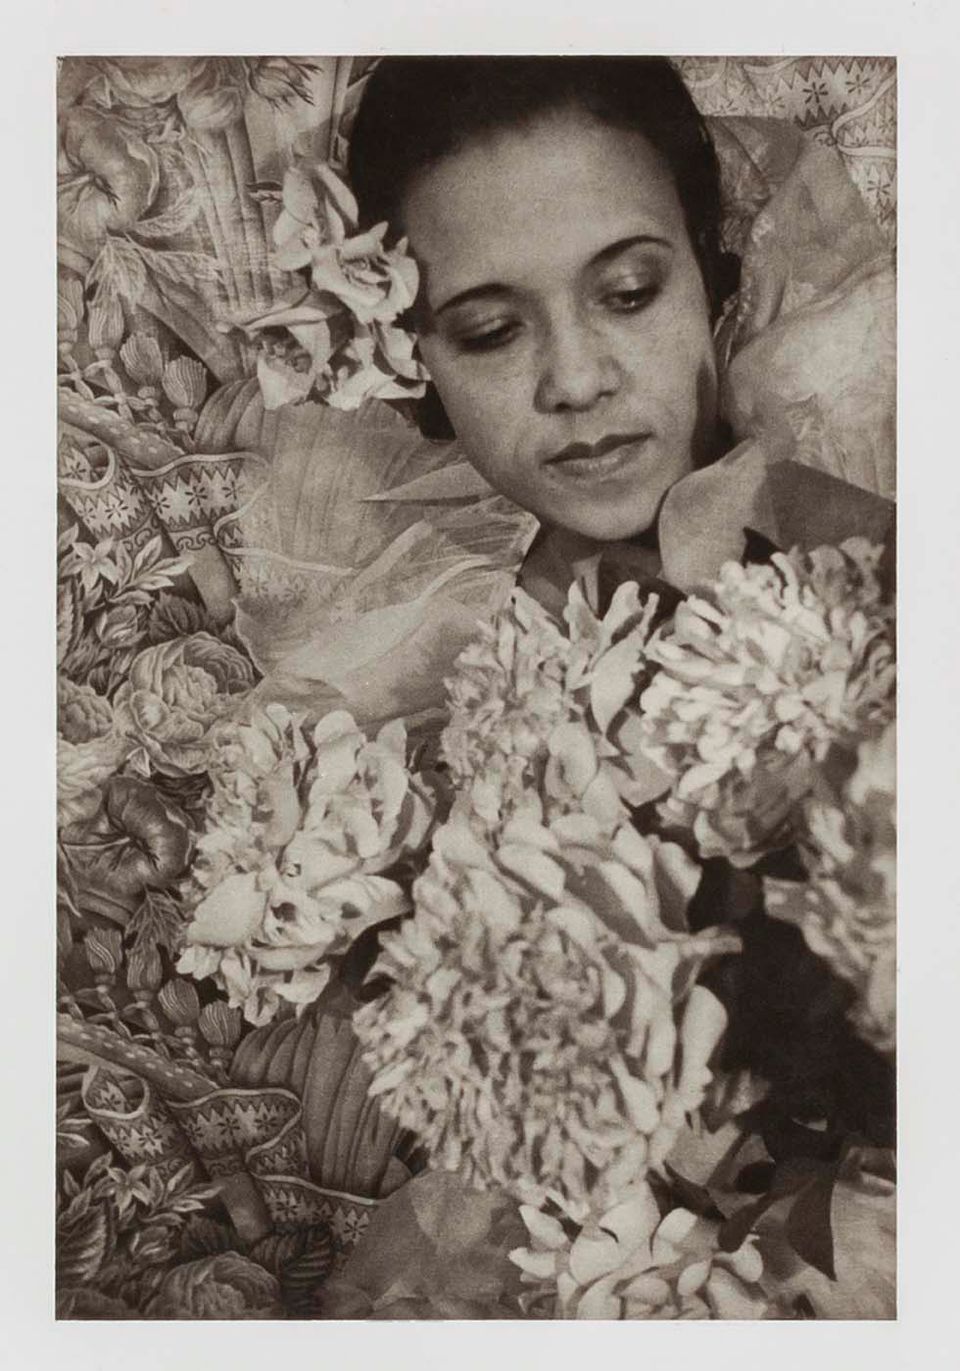 A black and white photograph of a woman looking down, part of the exhibition Harlem Heroes: Photographs by Carl Van Vechten 